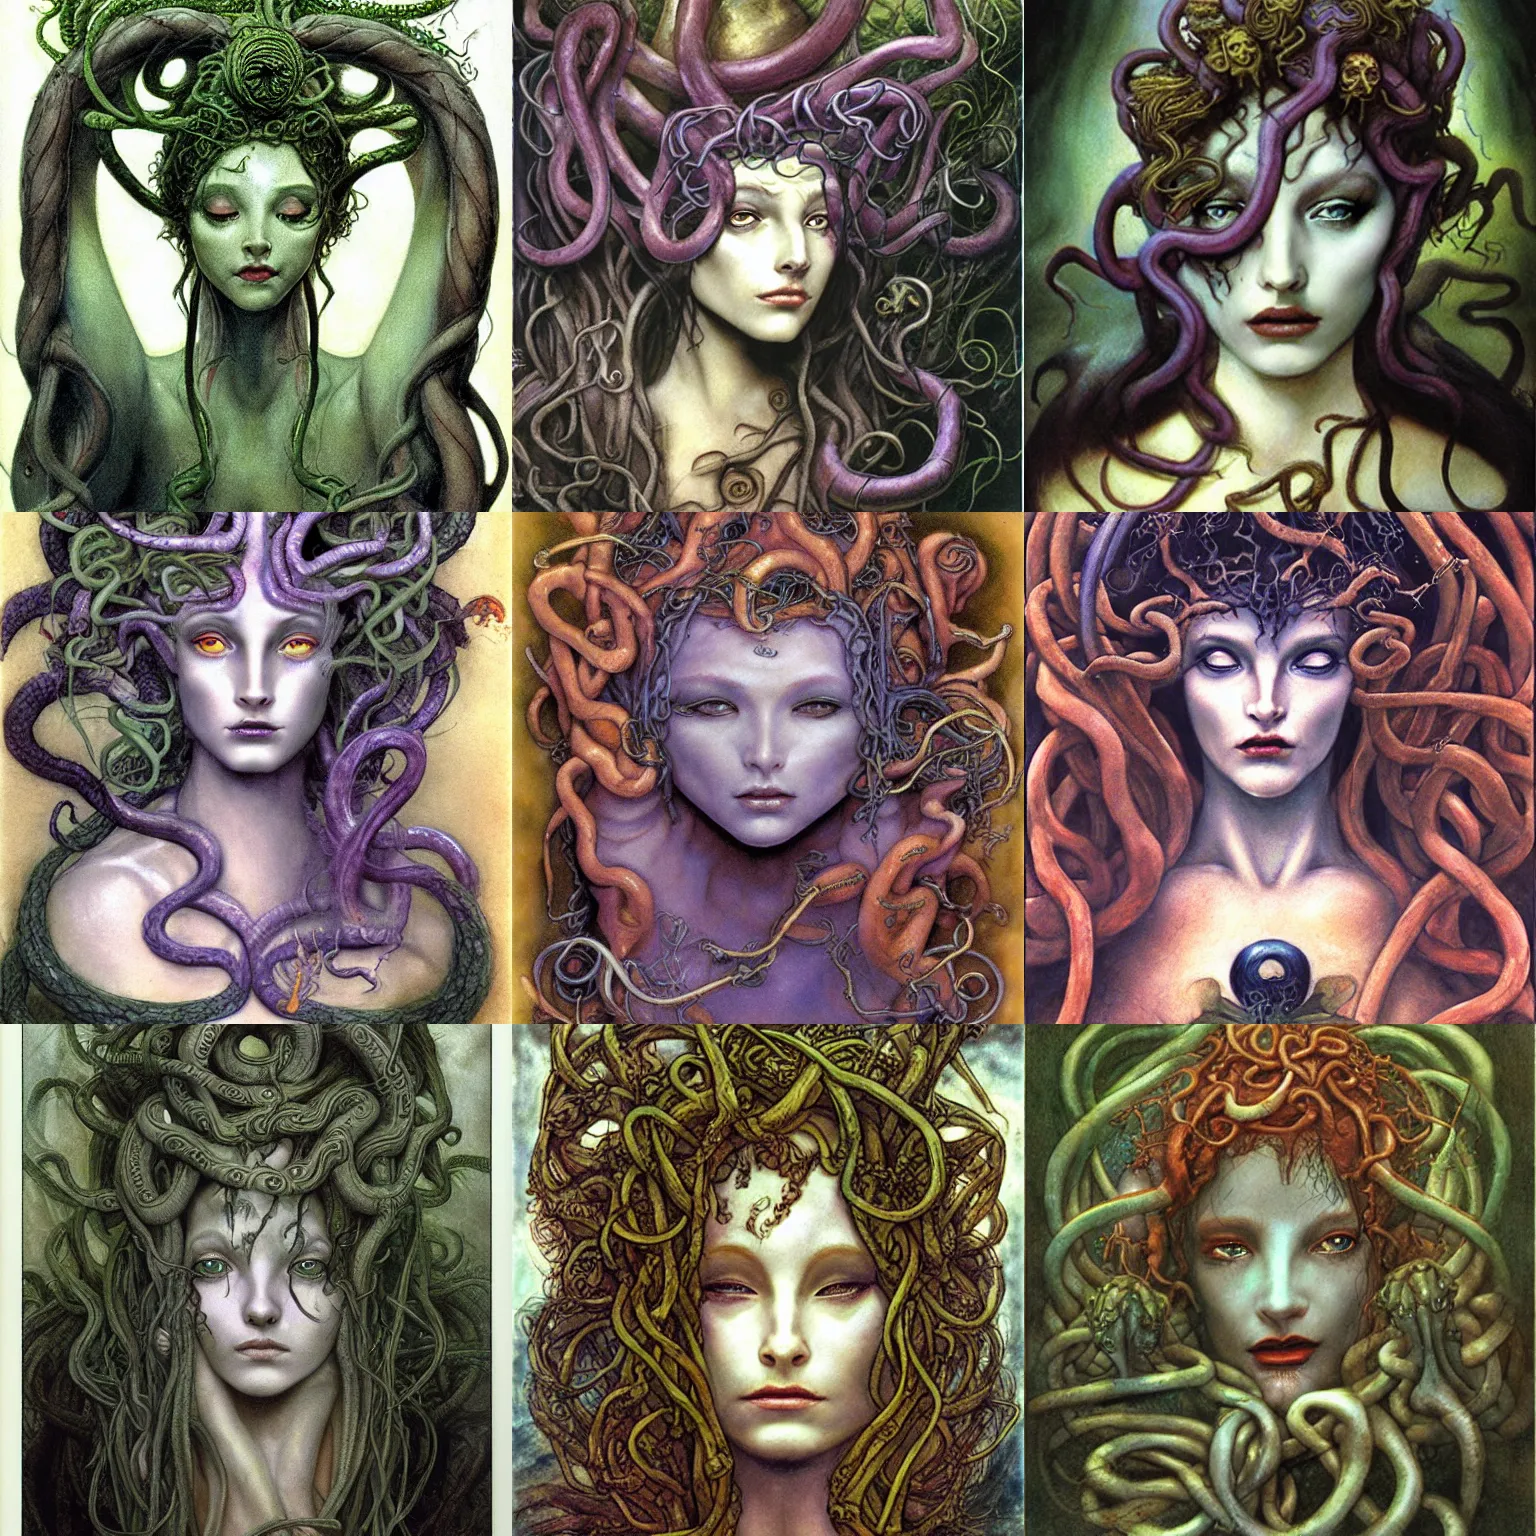 Prompt: medusa by brian froud